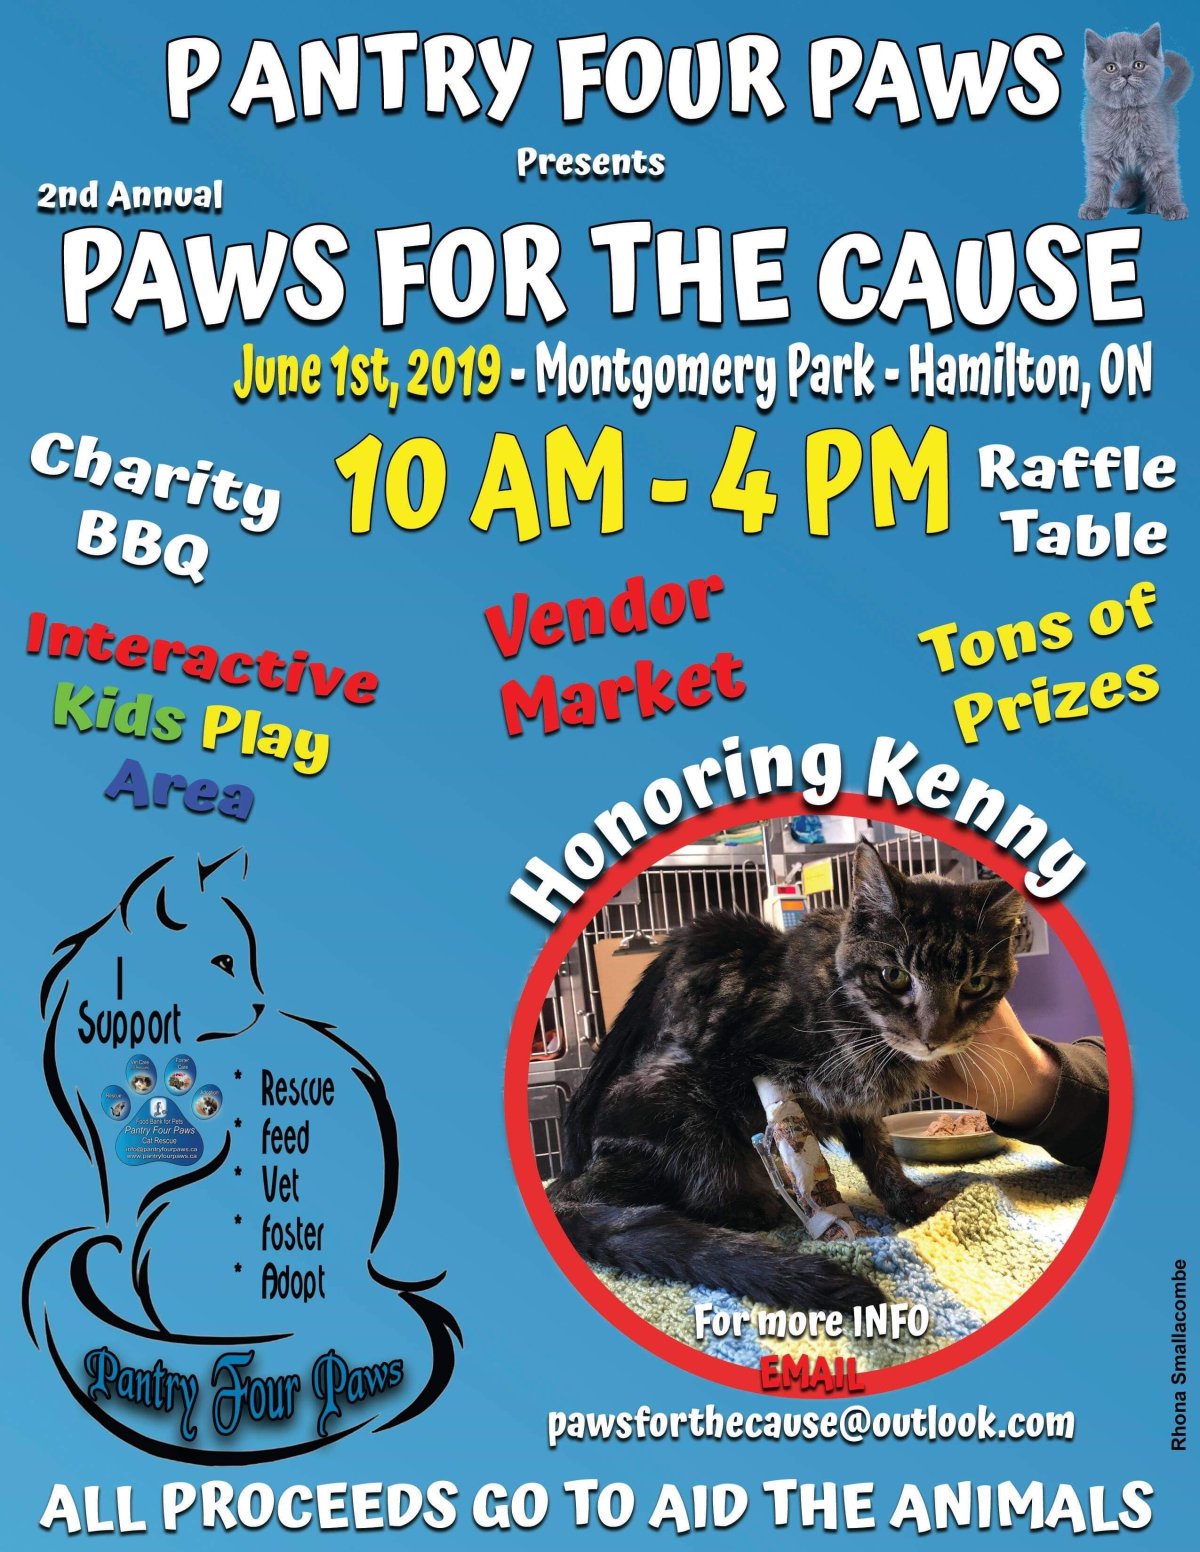 Paws for the Cause - image